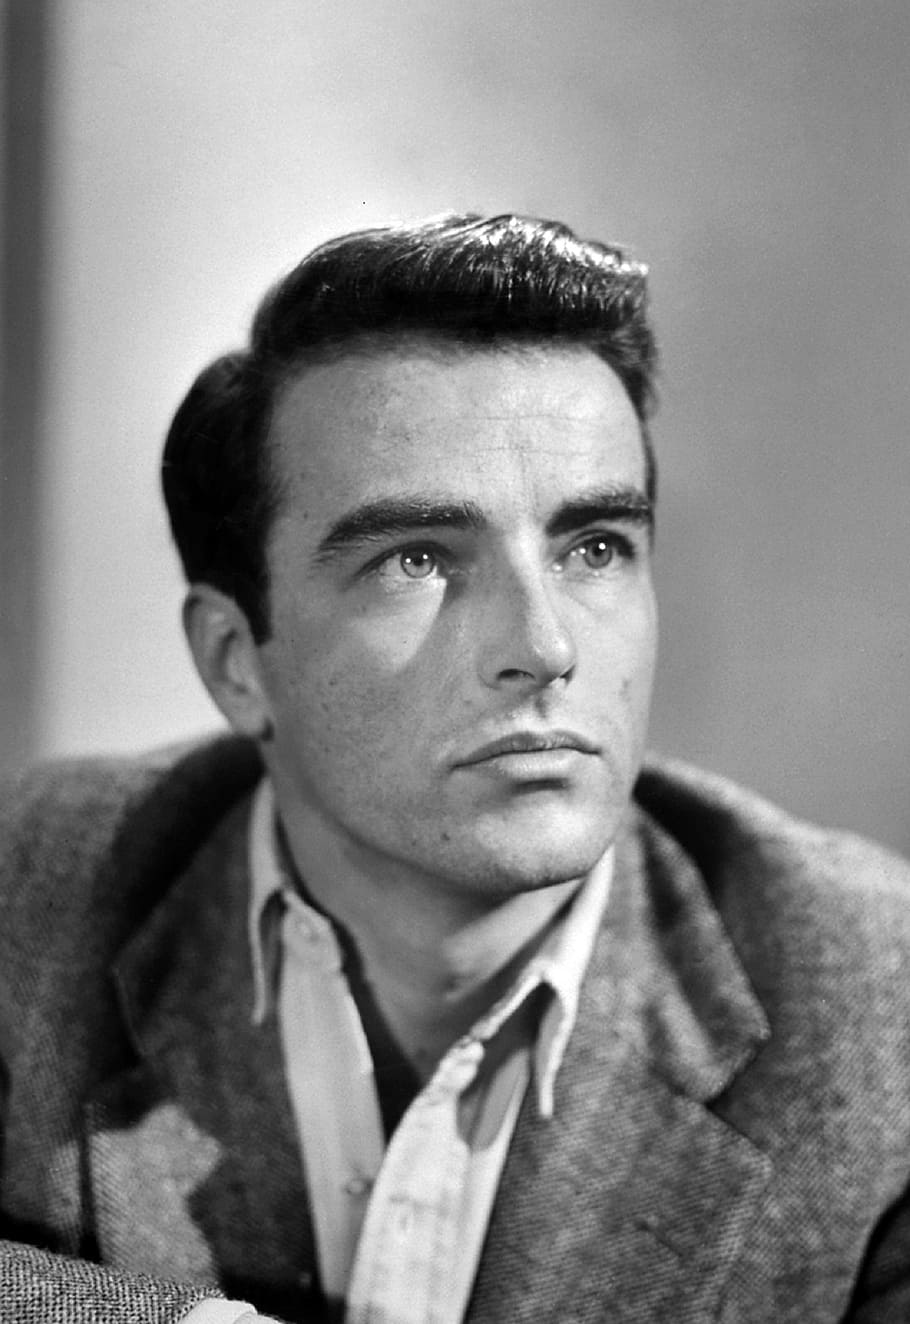 Hd Wallpaper Grayscale Photo Of James Dean Montgomery Clift Actor Film Wallpaper Flare